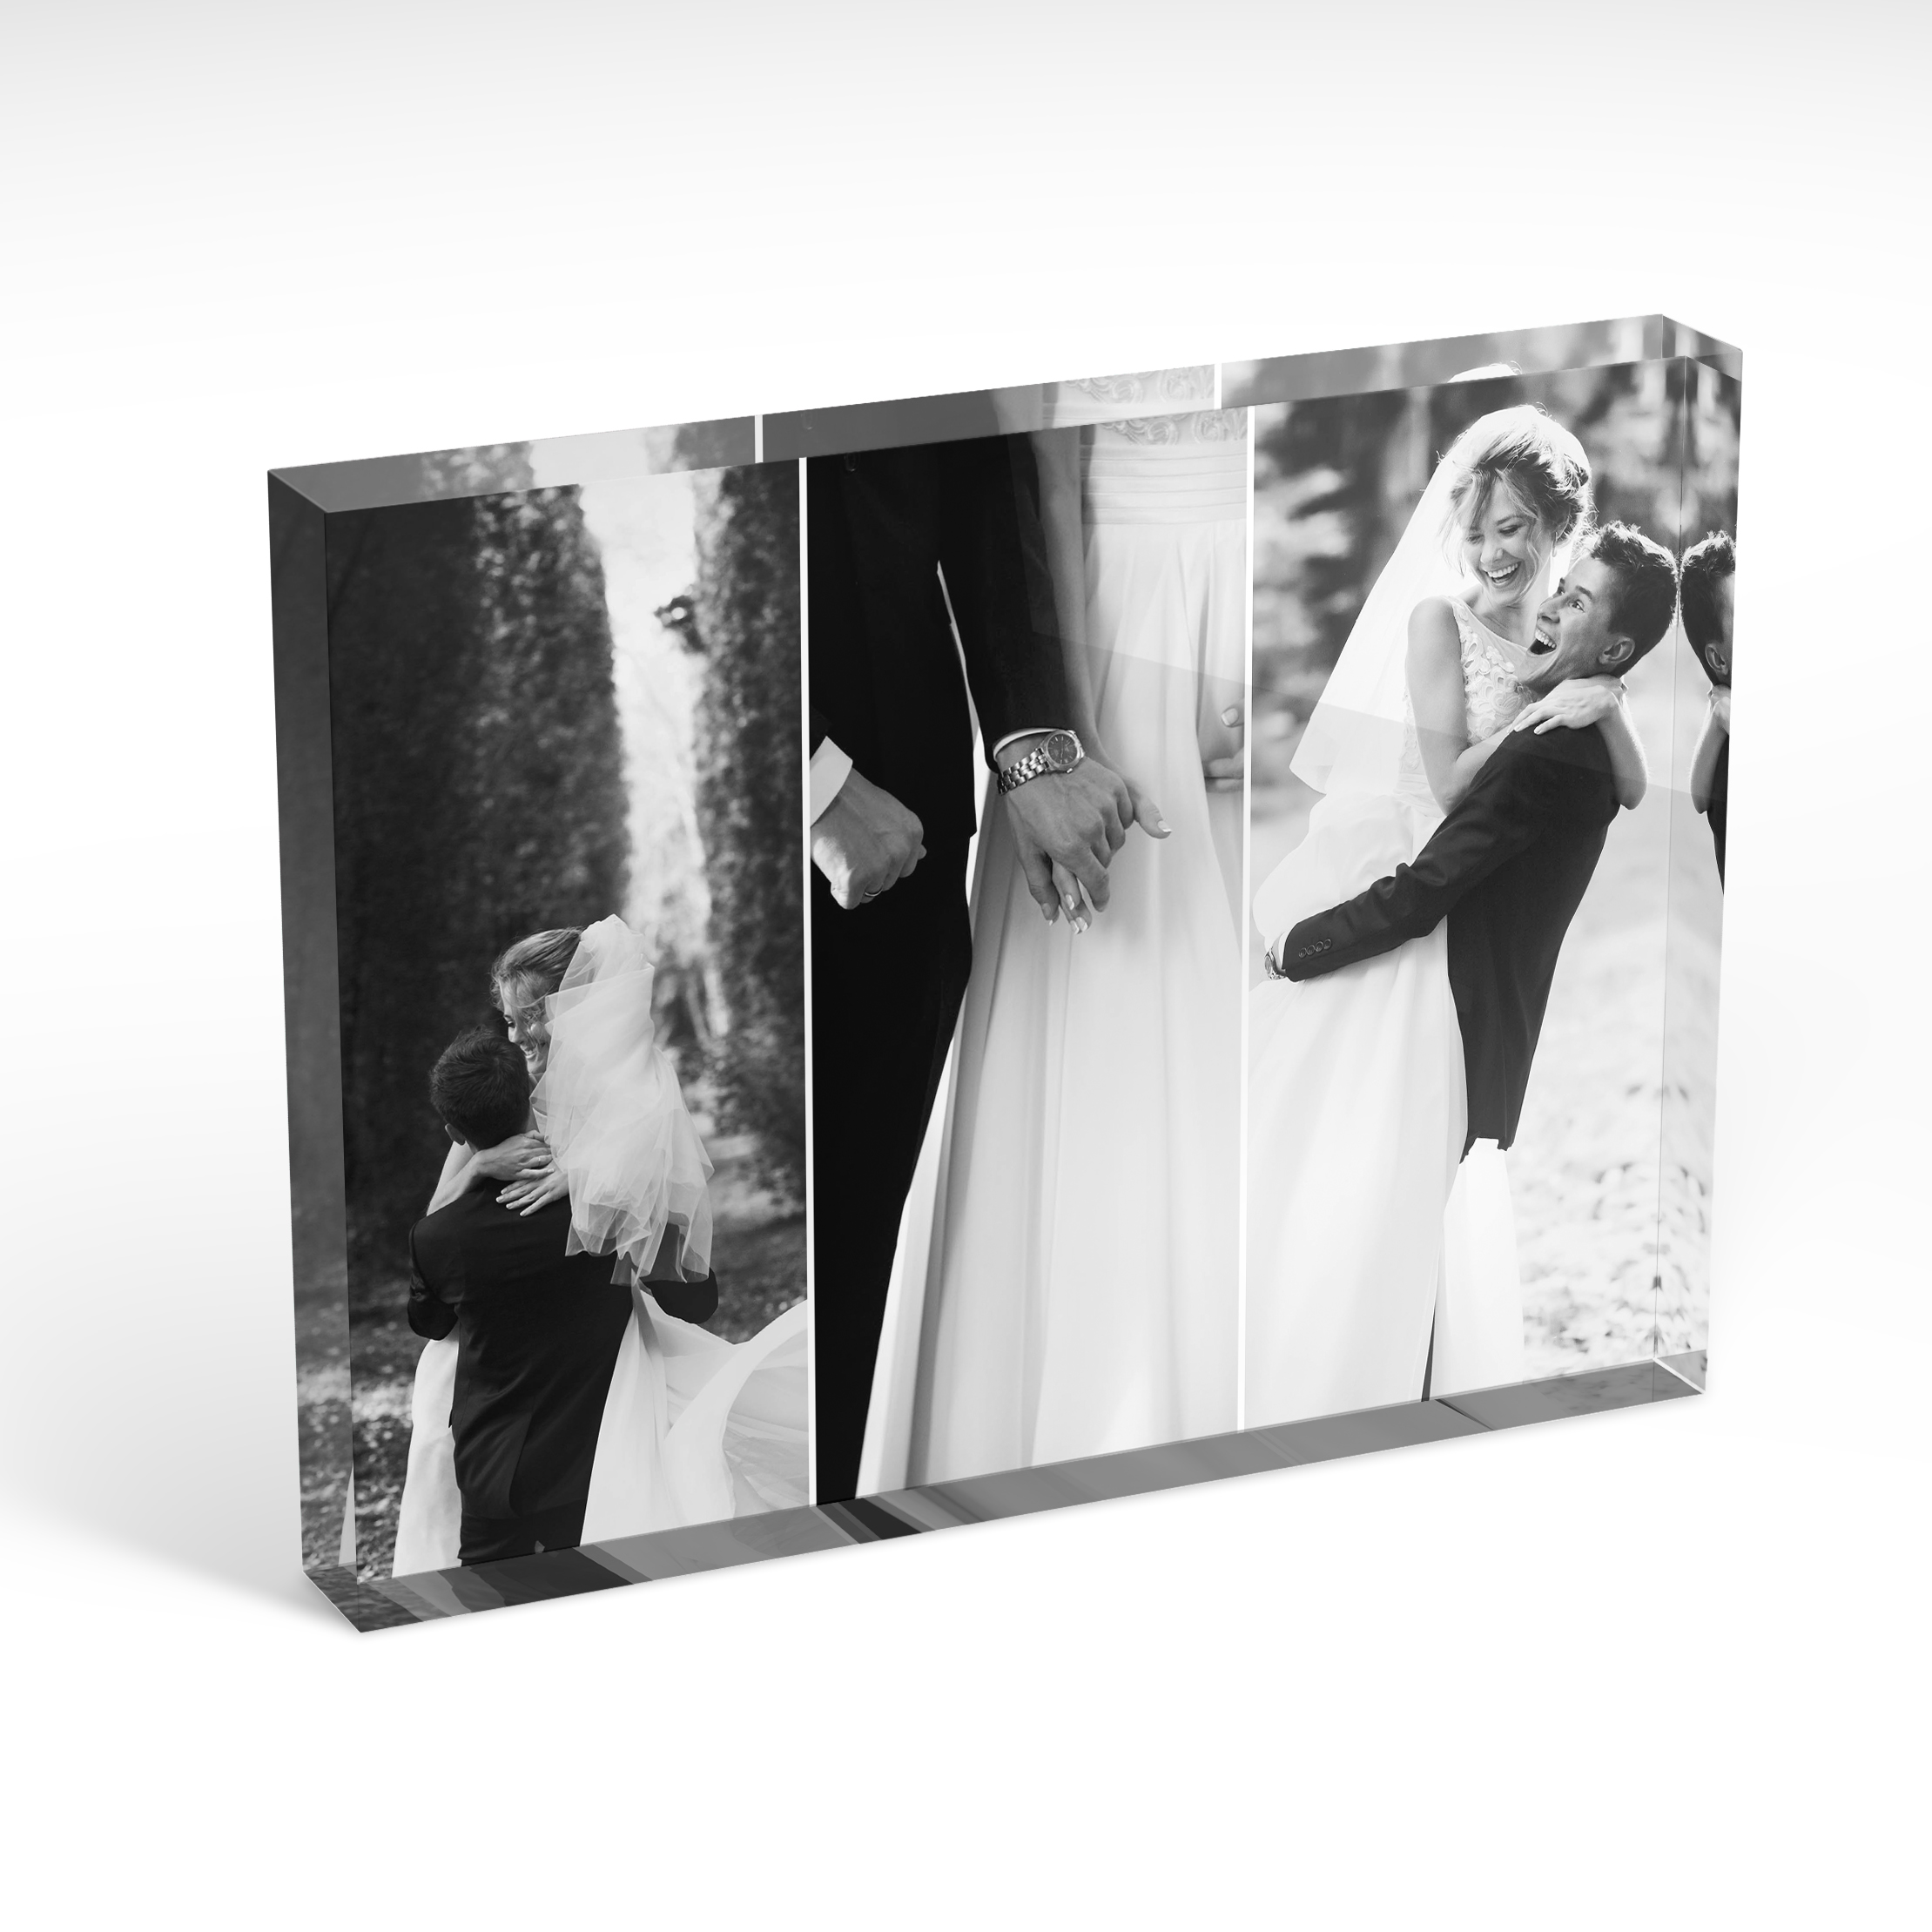 An angled side view of a landscape layout Acrylic Photo Block with space for 3 photos. Thiis design is named "Romantic Trio". 